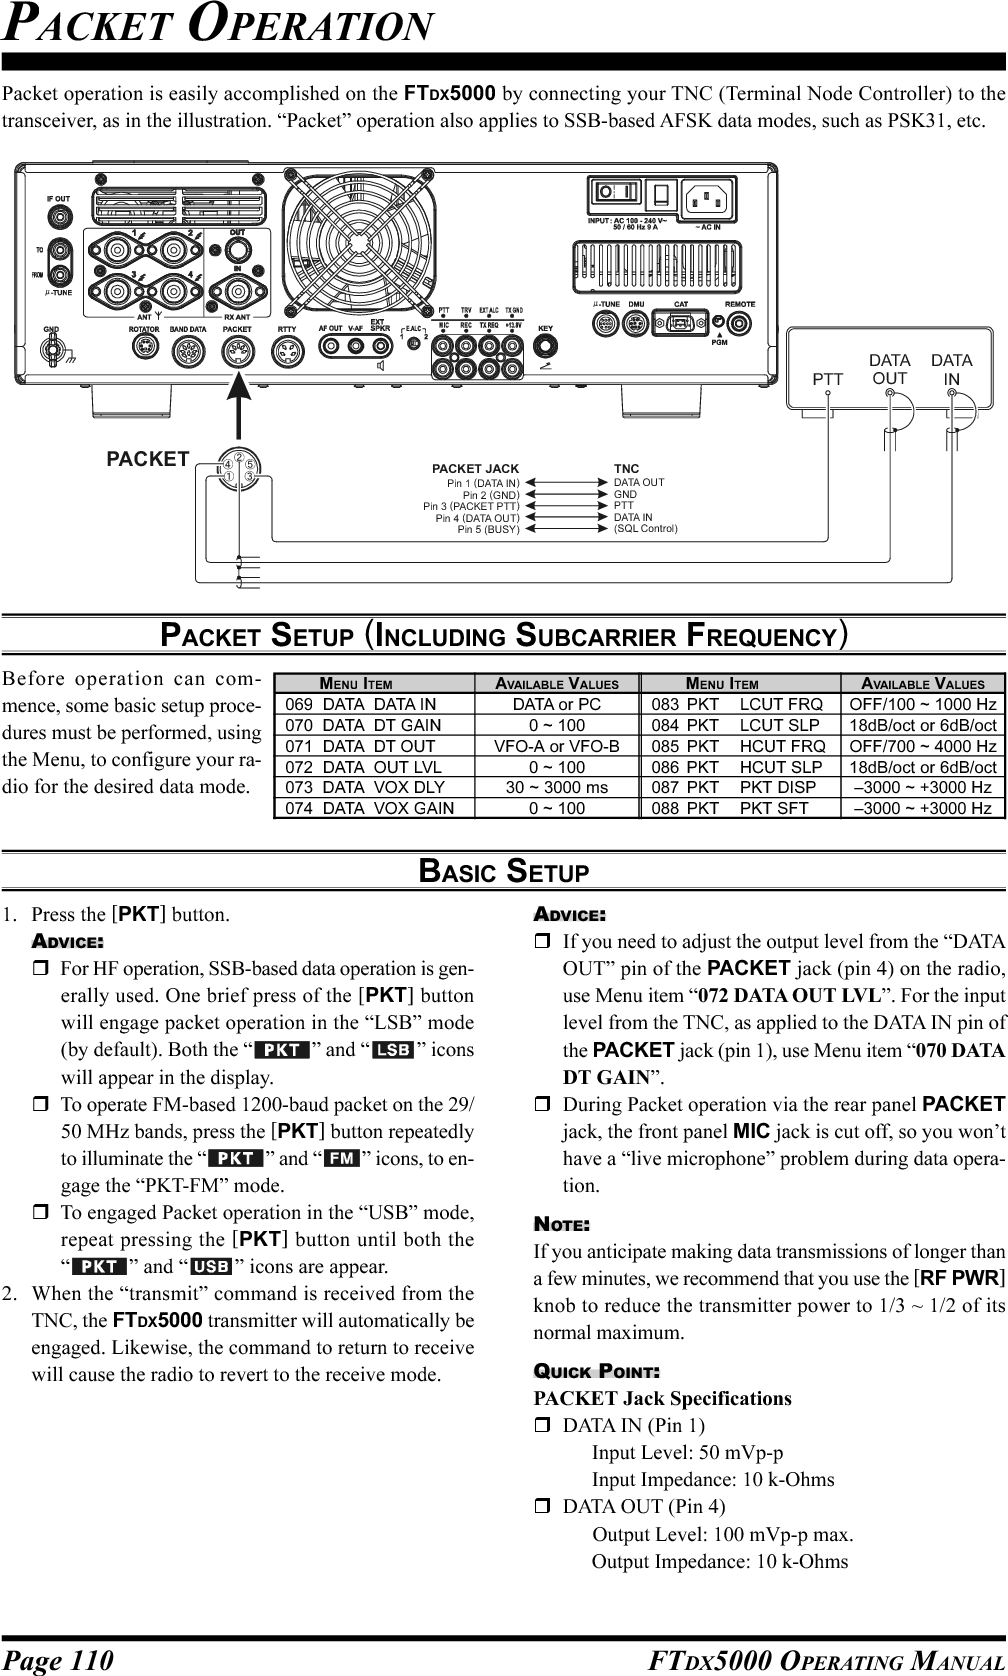 Page 110 FTDX5000 OPERATING MANUALPacket operation is easily accomplished on the FTDX5000 by connecting your TNC (Terminal Node Controller) to thetransceiver, as in the illustration. “Packet” operation also applies to SSB-based AFSK data modes, such as PSK31, etc.PACKET OPERATIONPACKET SETUP (INCLUDING SUBCARRIER FREQUENCY)Before operation can com-mence, some basic setup proce-dures must be performed, usingthe Menu, to configure your ra-dio for the desired data mode.BASIC SETUP1. Press the [PKT] button.ADVICE:For HF operation, SSB-based data operation is gen-erally used. One brief press of the [PKT] buttonwill engage packet operation in the “LSB” mode(by default). Both the “ ” and “ ” iconswill appear in the display.To operate FM-based 1200-baud packet on the 29/50 MHz bands, press the [PKT] button repeatedlyto illuminate the “ ” and “ ” icons, to en-gage the “PKT-FM” mode.To engaged Packet operation in the “USB” mode,repeat pressing the [PKT] button until both the“” and “ ” icons are appear.2. When the “transmit” command is received from theTNC, the FTDX5000 transmitter will automatically beengaged. Likewise, the command to return to receivewill cause the radio to revert to the receive mode.ADVICE:If you need to adjust the output level from the “DATAOUT” pin of the PACKET jack (pin 4) on the radio,use Menu item “072 DATA OUT LVL”. For the inputlevel from the TNC, as applied to the DATA IN pin ofthe PACKET jack (pin 1), use Menu item “070 DATADT GAIN”.During Packet operation via the rear panel PACKETjack, the front panel MIC jack is cut off, so you won’thave a “live microphone” problem during data opera-tion.NOTE:If you anticipate making data transmissions of longer thana few minutes, we recommend that you use the [RF PWR]knob to reduce the transmitter power to 1/3 ~ 1/2 of itsnormal maximum.QUICK POINT:PACKET Jack SpecificationsDATA IN (Pin 1)Input Level: 50 mVp-pInput Impedance: 10 k-OhmsDATA OUT (Pin 4)Output Level: 100 mVp-p max.Output Impedance: 10 k-OhmsDATAOUTPTTDATAIN①⑤④③②PACKETPACKET JACK TNCPin 1 (DATA IN)Pin 2Pin 3Pin 4Pin 5 (GND) (PACKET PTT) (DATA OUT) (BUSY)DATA OUTGNDPTTDATA IN(SQL Control)MENU ITEM069  DATA DATA IN070  DATA DT GAIN071  DATA DT OUT072  DATA OUT LVL073  DATA VOX DLY074  DATA VOX GAINMENU ITEM083 PKT LCUT FRQ084 PKT LCUT SLP085 PKT HCUT FRQ086 PKT HCUT SLP087 PKT PKT DISP088 PKT PKT SFTAVAILABLE VALUESDATA or PC0 ~ 100VFO-A or VFO-B0 ~ 10030 ~ 3000 ms0 ~ 100AVAILABLE VALUESOFF/100 ~ 1000 Hz18dB/oct or 6dB/octOFF/700 ~ 4000 Hz18dB/oct or 6dB/oct–3000 ~ +3000 Hz–3000 ~ +3000 Hz